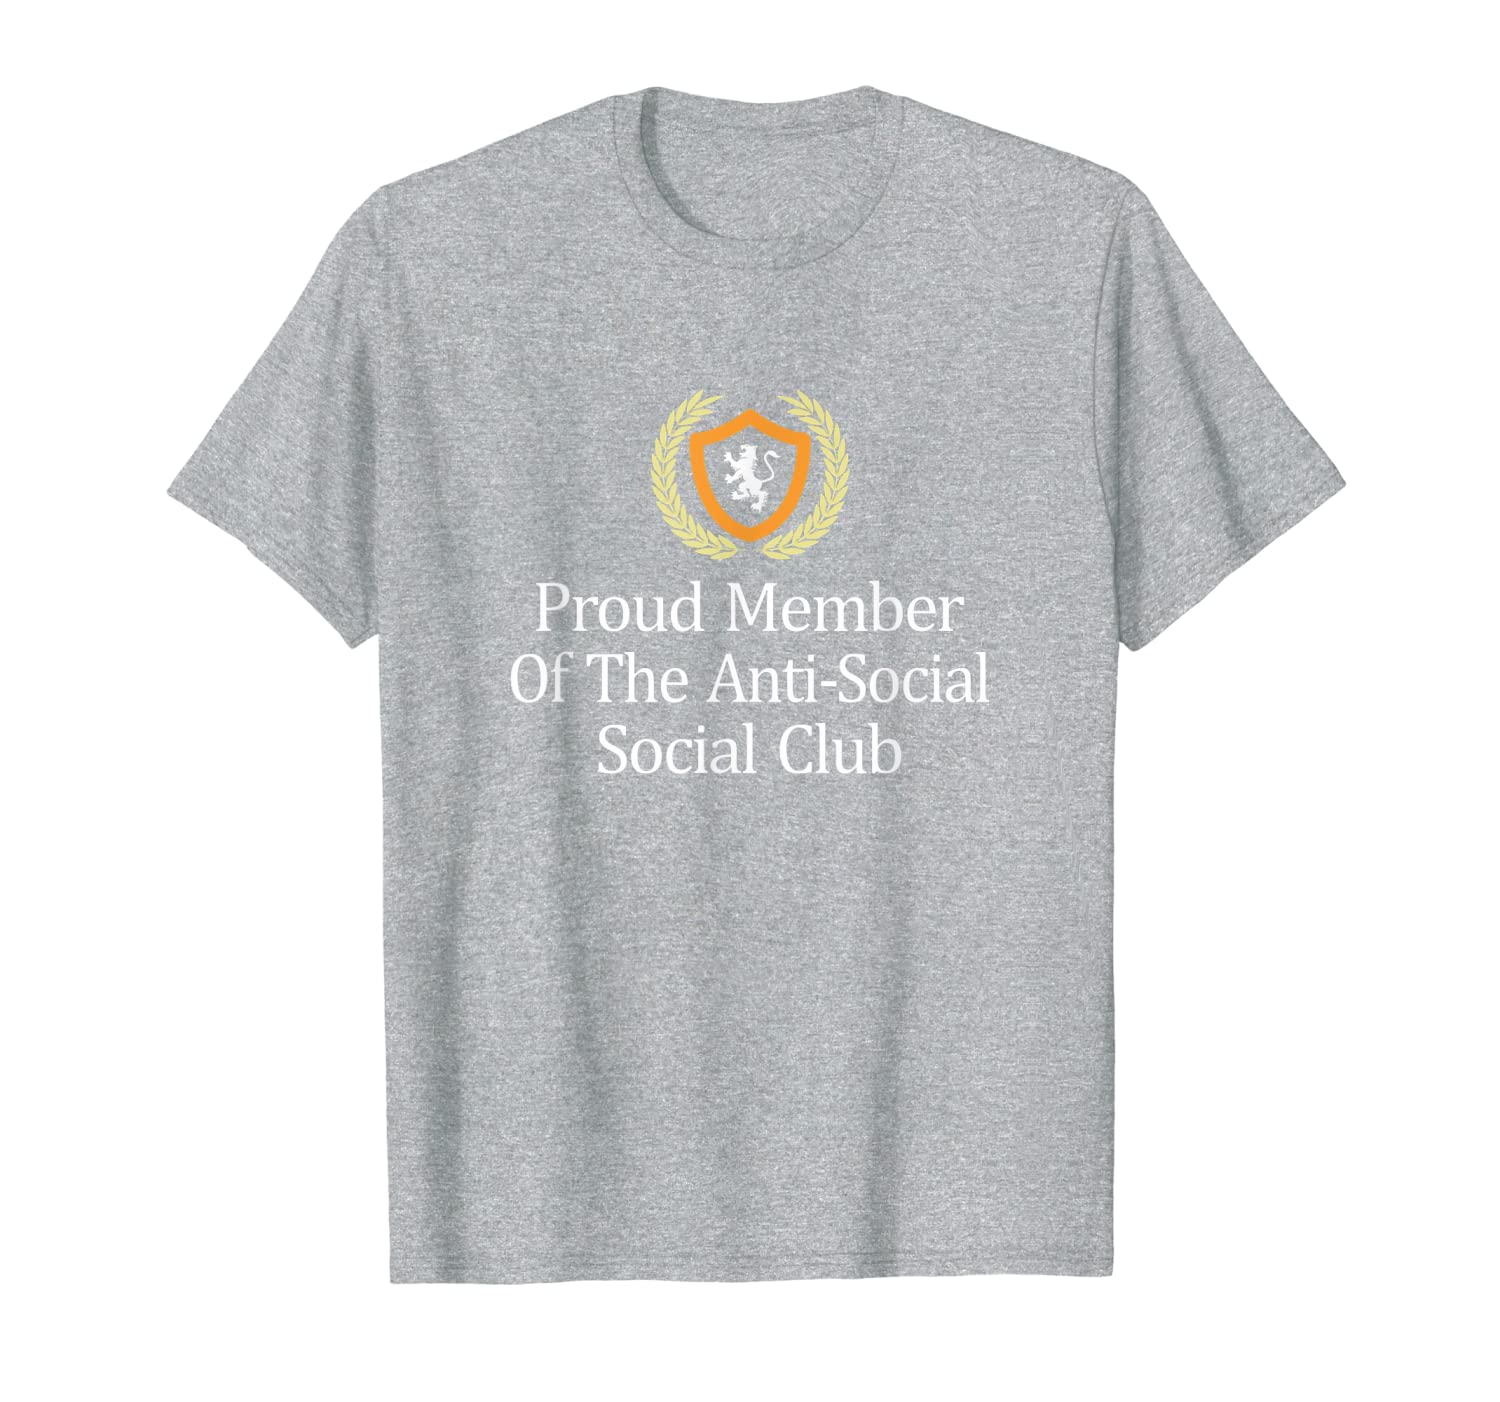 

Proud Member Of The Anti-Social Social Club - T-Shirt, Mainly pictures